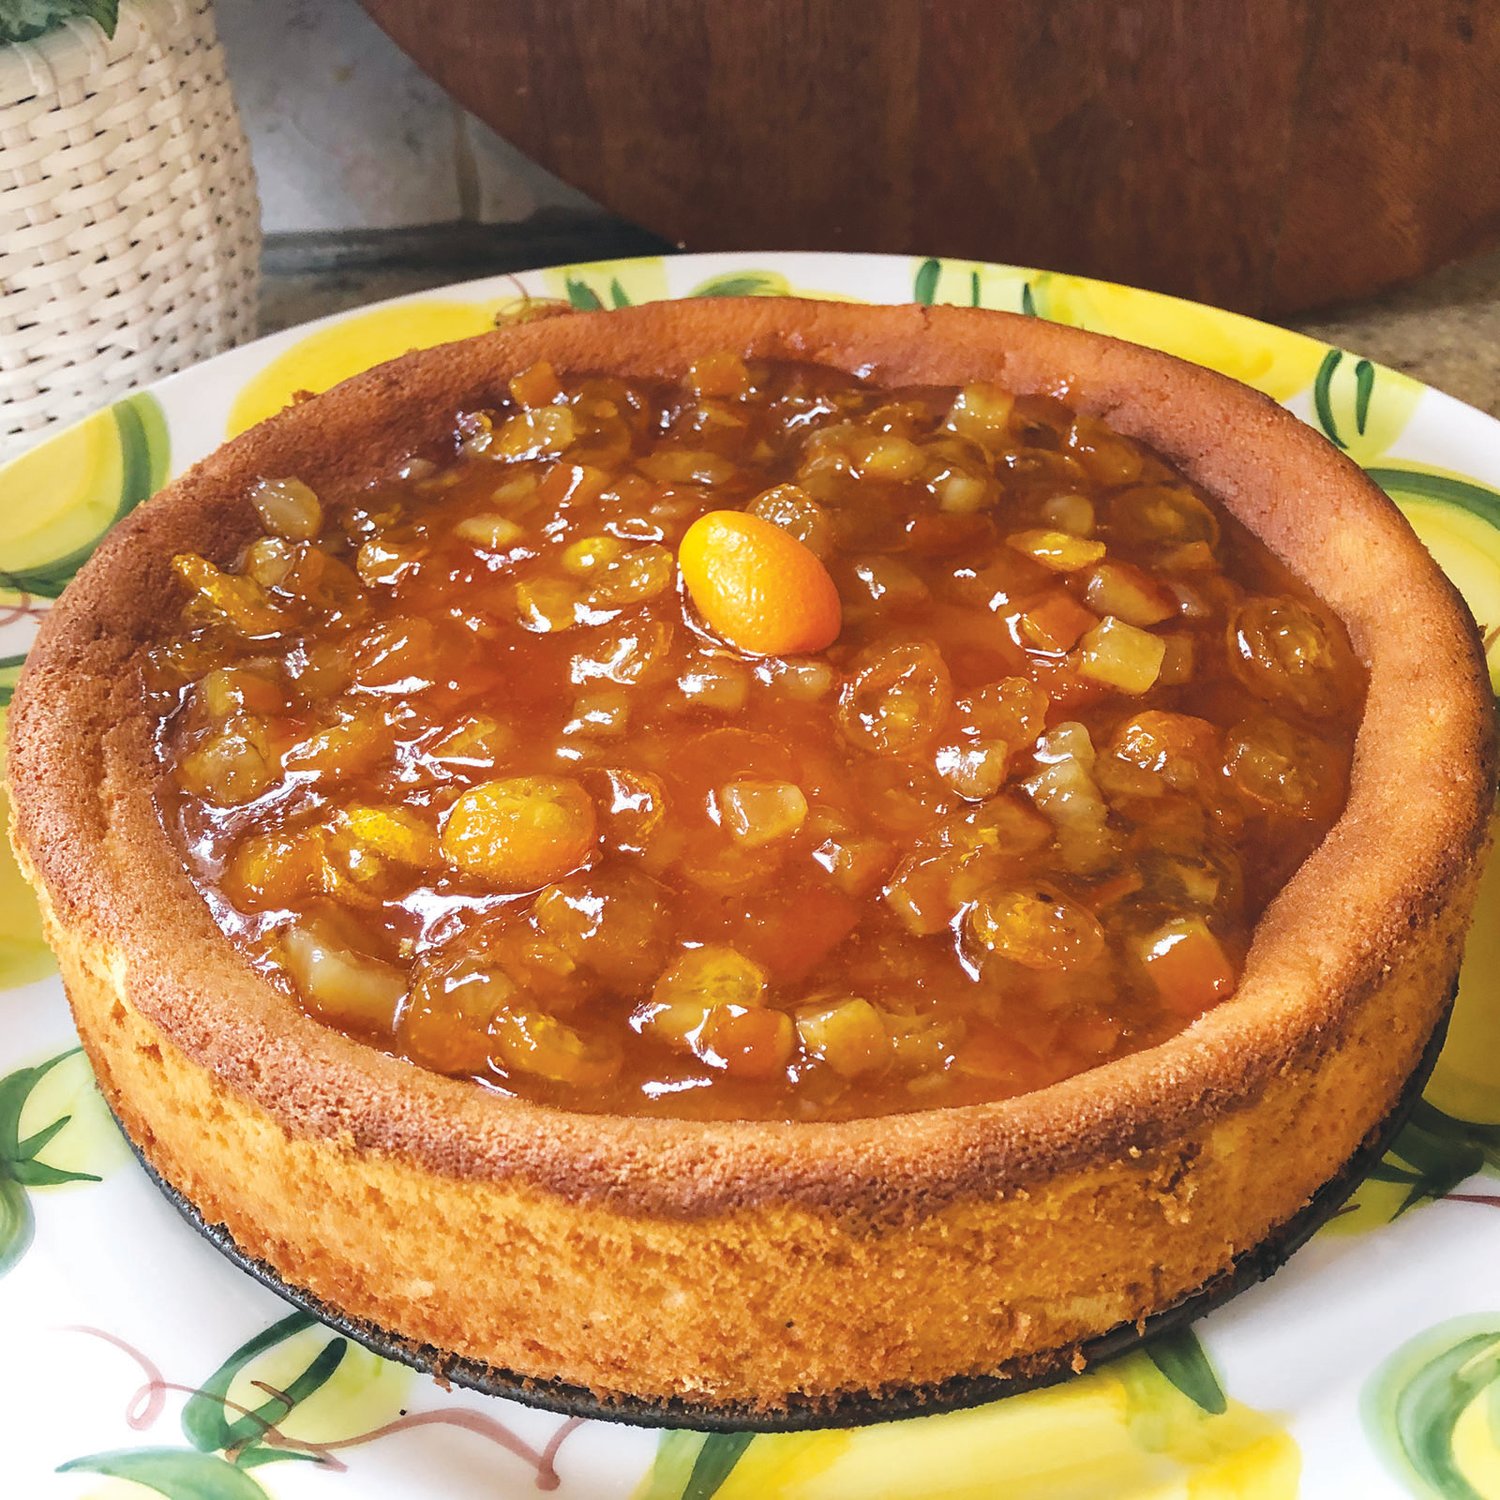 This ricotta cake with a kumquat and marmalade topping could be a fitting finale to an Easter dinner.